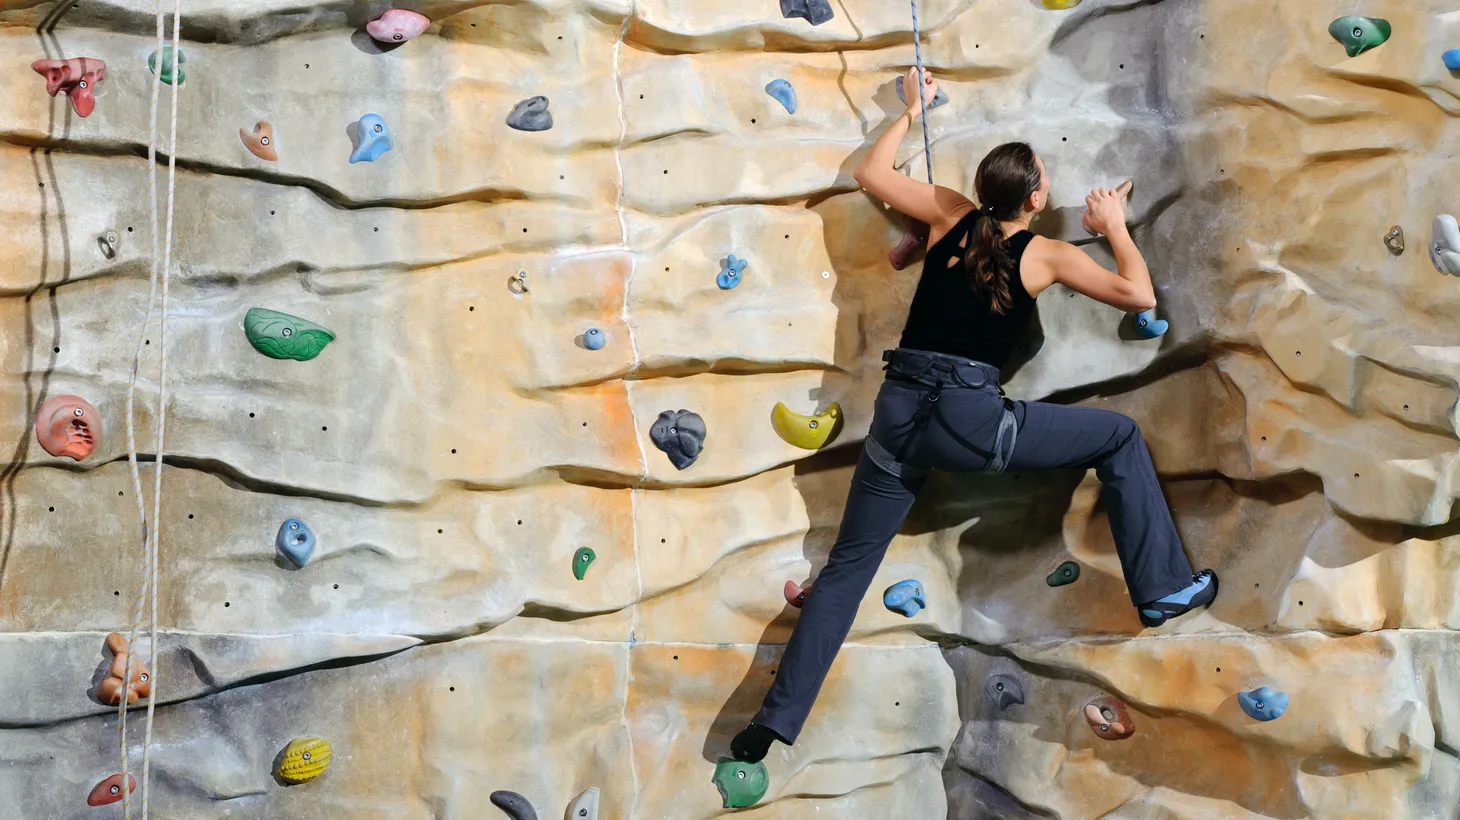 “The great thing about rock climbing is that it's an inherently adaptable sport. If you're running a race, there's one standard way that you're gonna run to the finish line. With climbing, you're looking to get to the top, but there's a whole bunch of different ways you can do that,” says Emily Seelenfreund, co-founder of ParaCliffHangers.